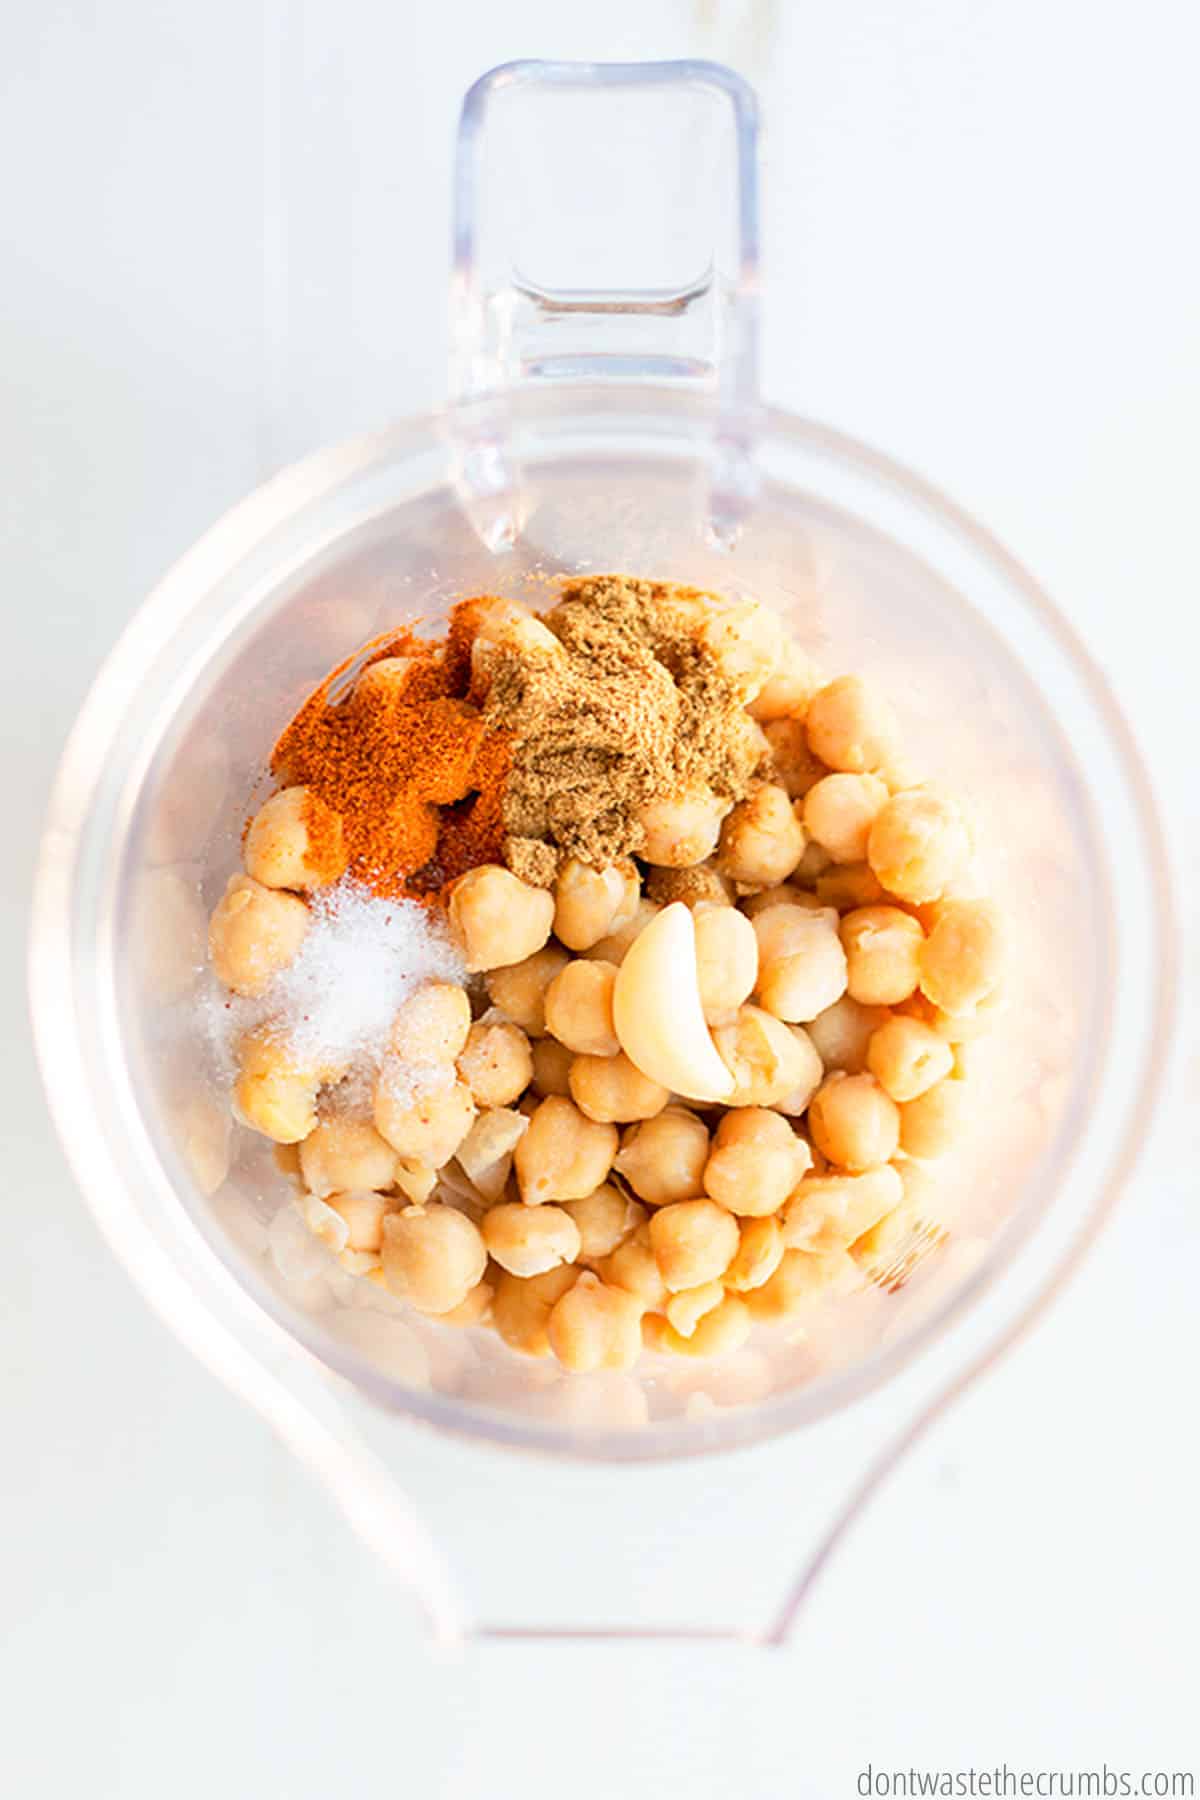 A food processor with the ingredients for homemade hummus (garbanzo beans, garlic, salt, cumin, cayenne pepper & water).